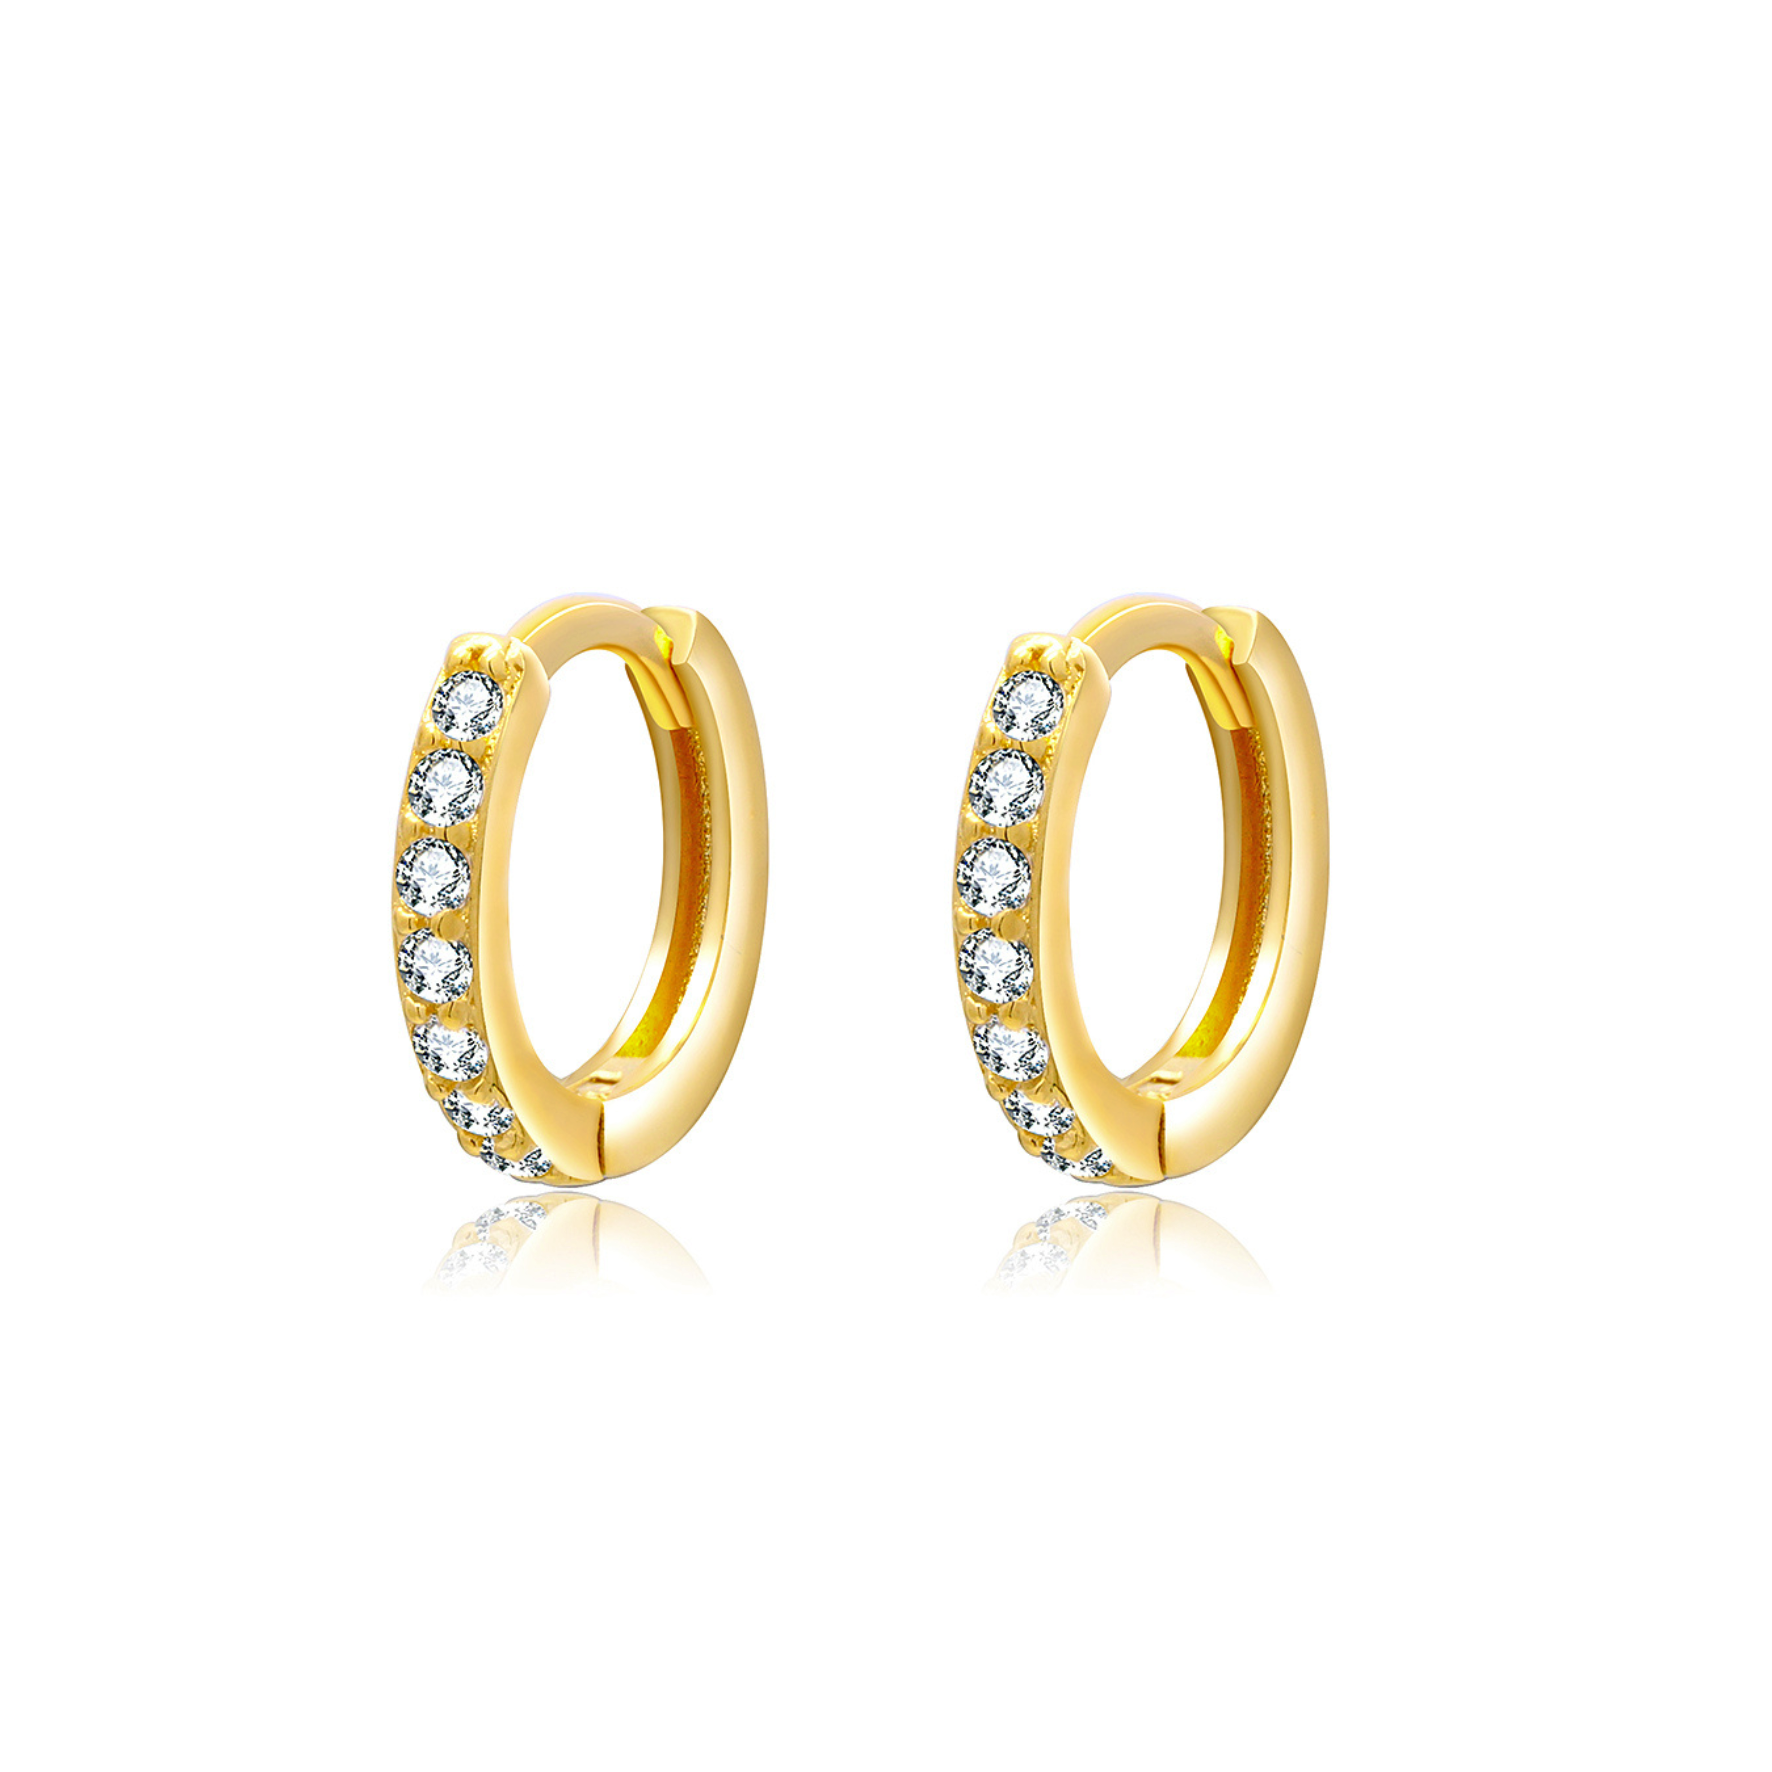 Anna Zircon Hoops from A-Hjort Jewellery in Goldplated Silver Sterling 925